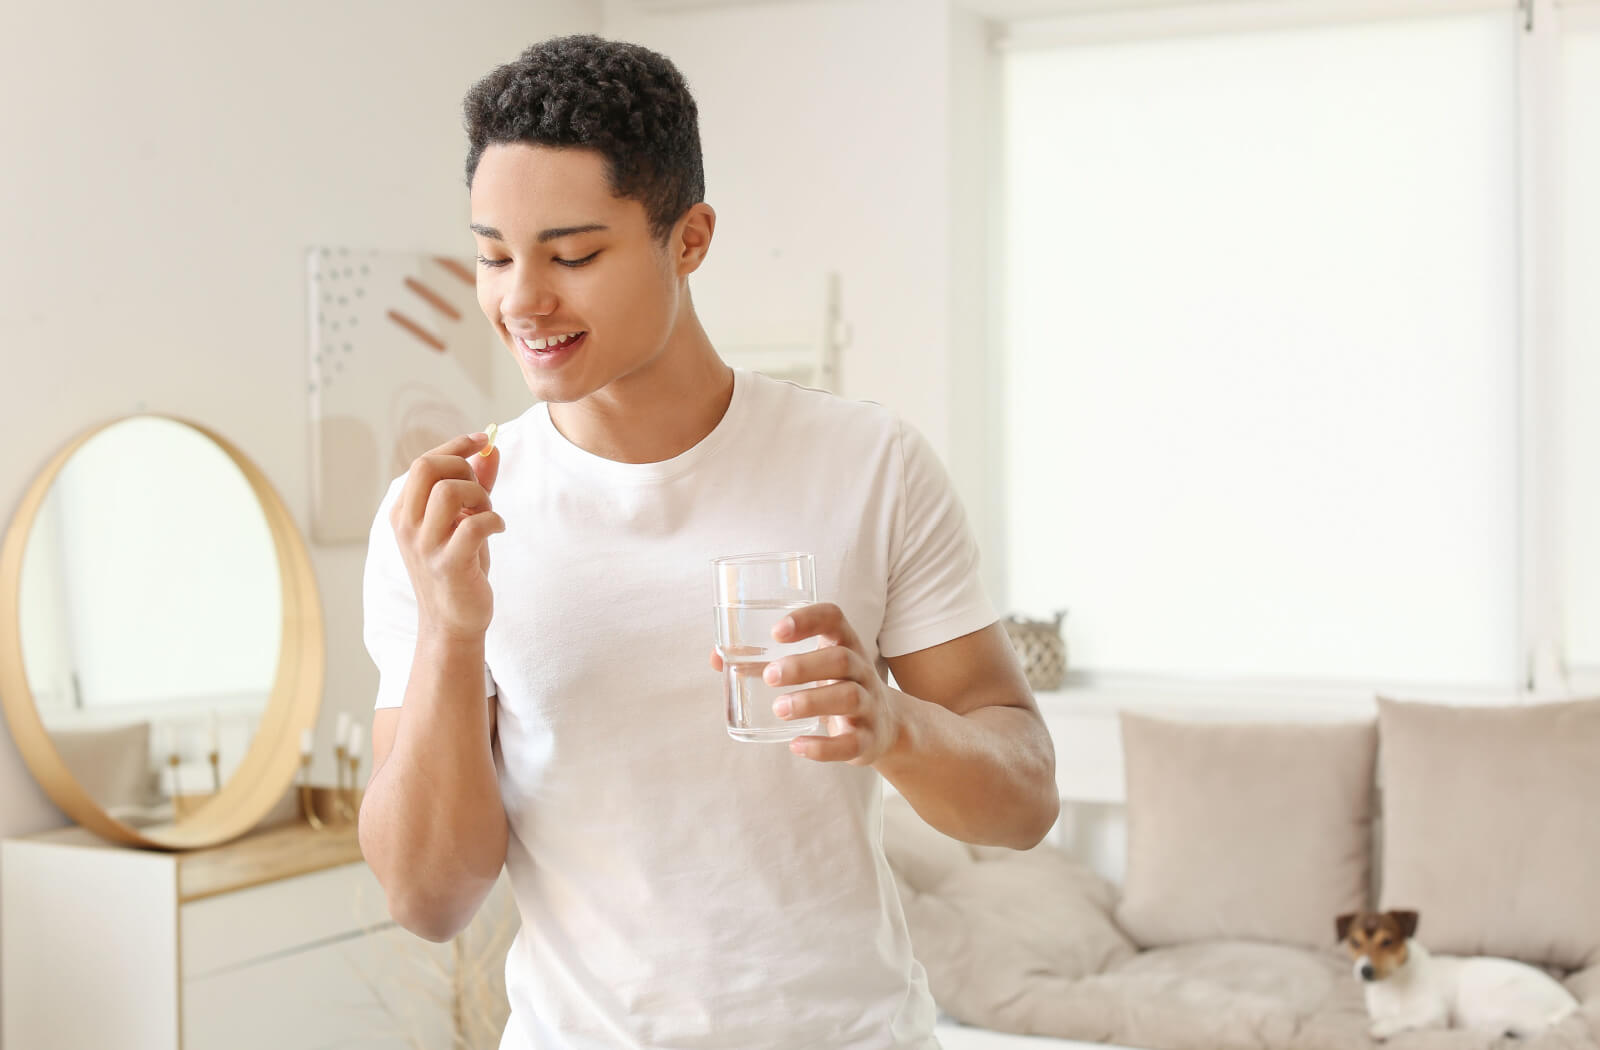 A teenage boy in a white shirt about to take vitamin supplements.